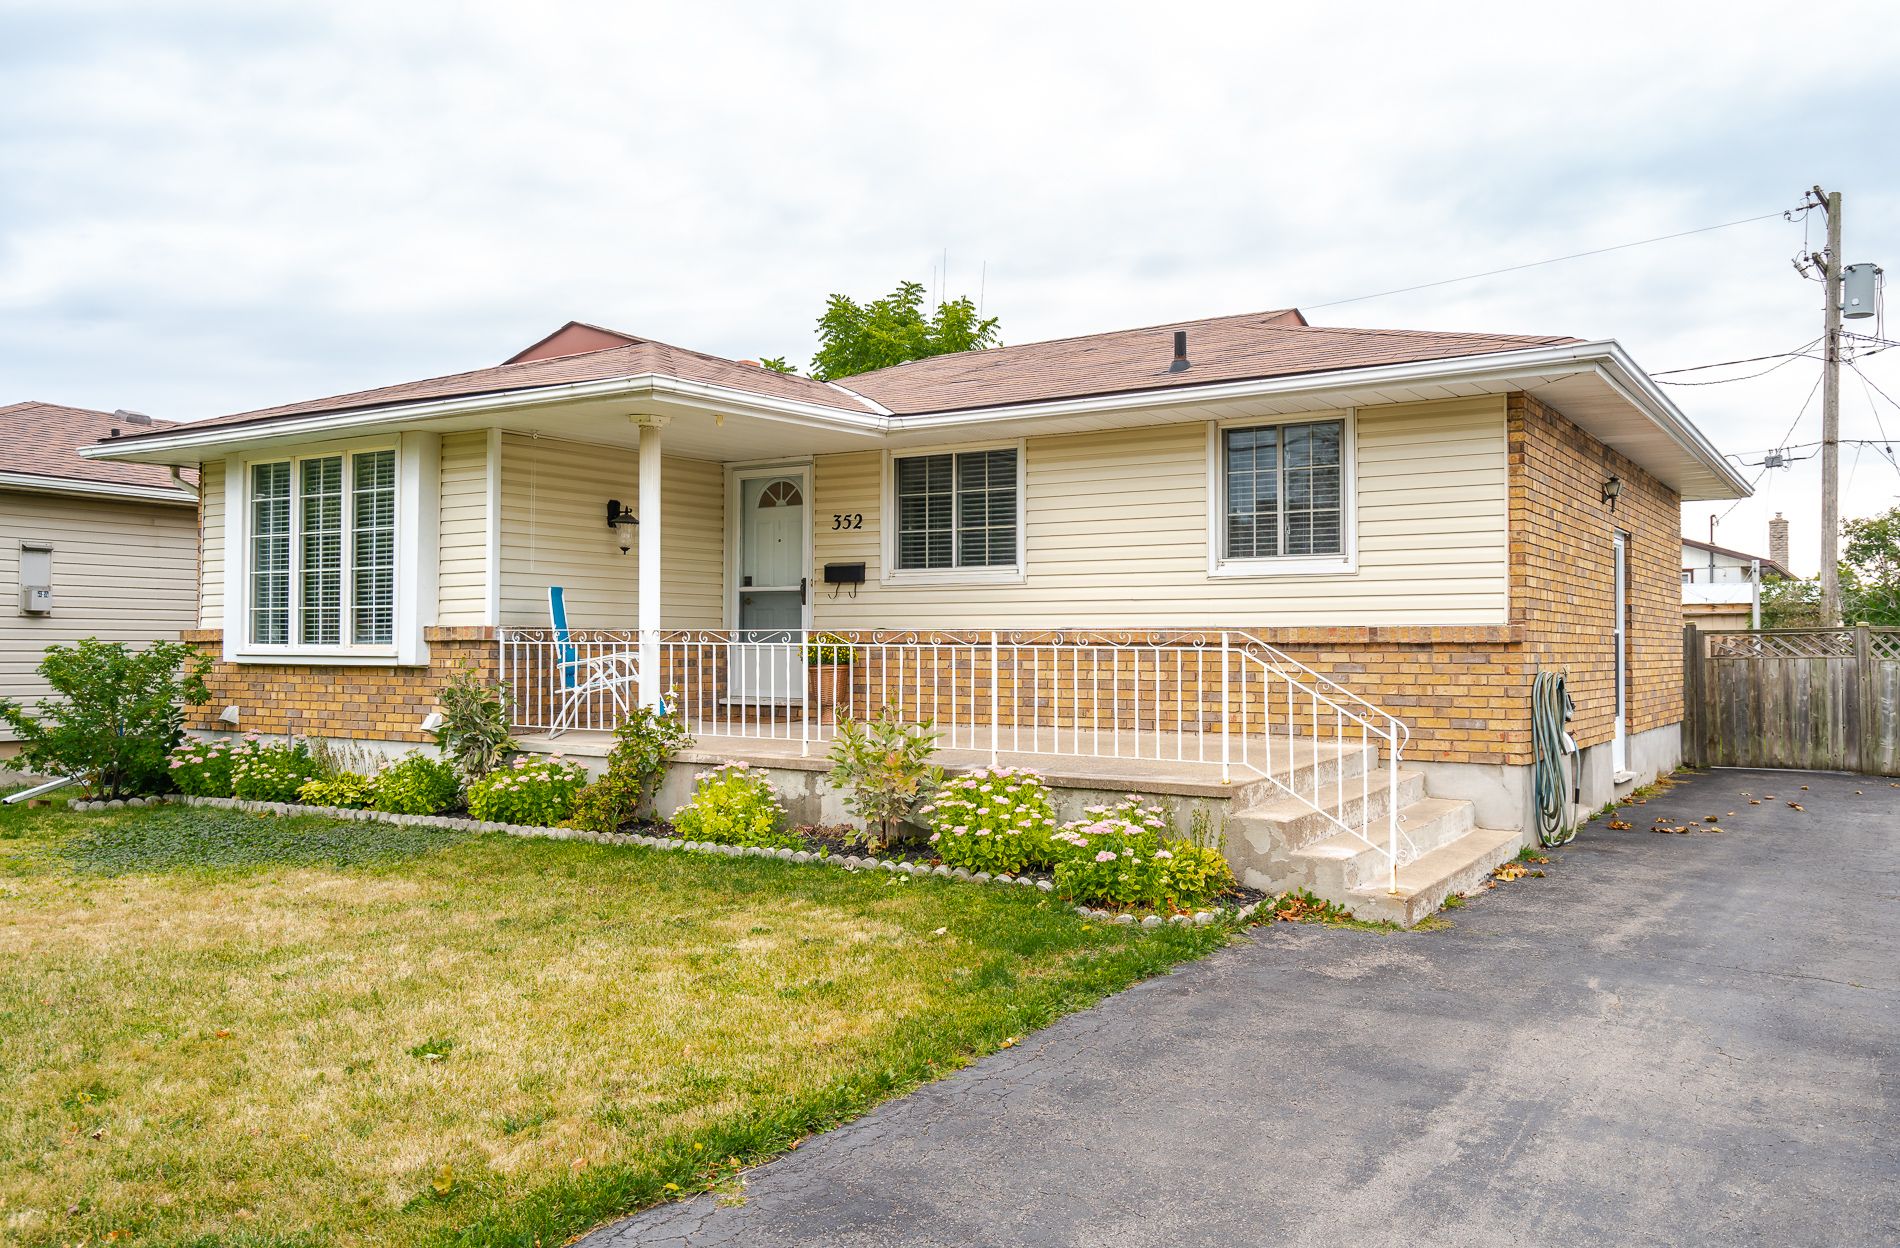 Main Photo: 352 First Avenue in Welland: North Welland House for sale : MLS®# 40018583